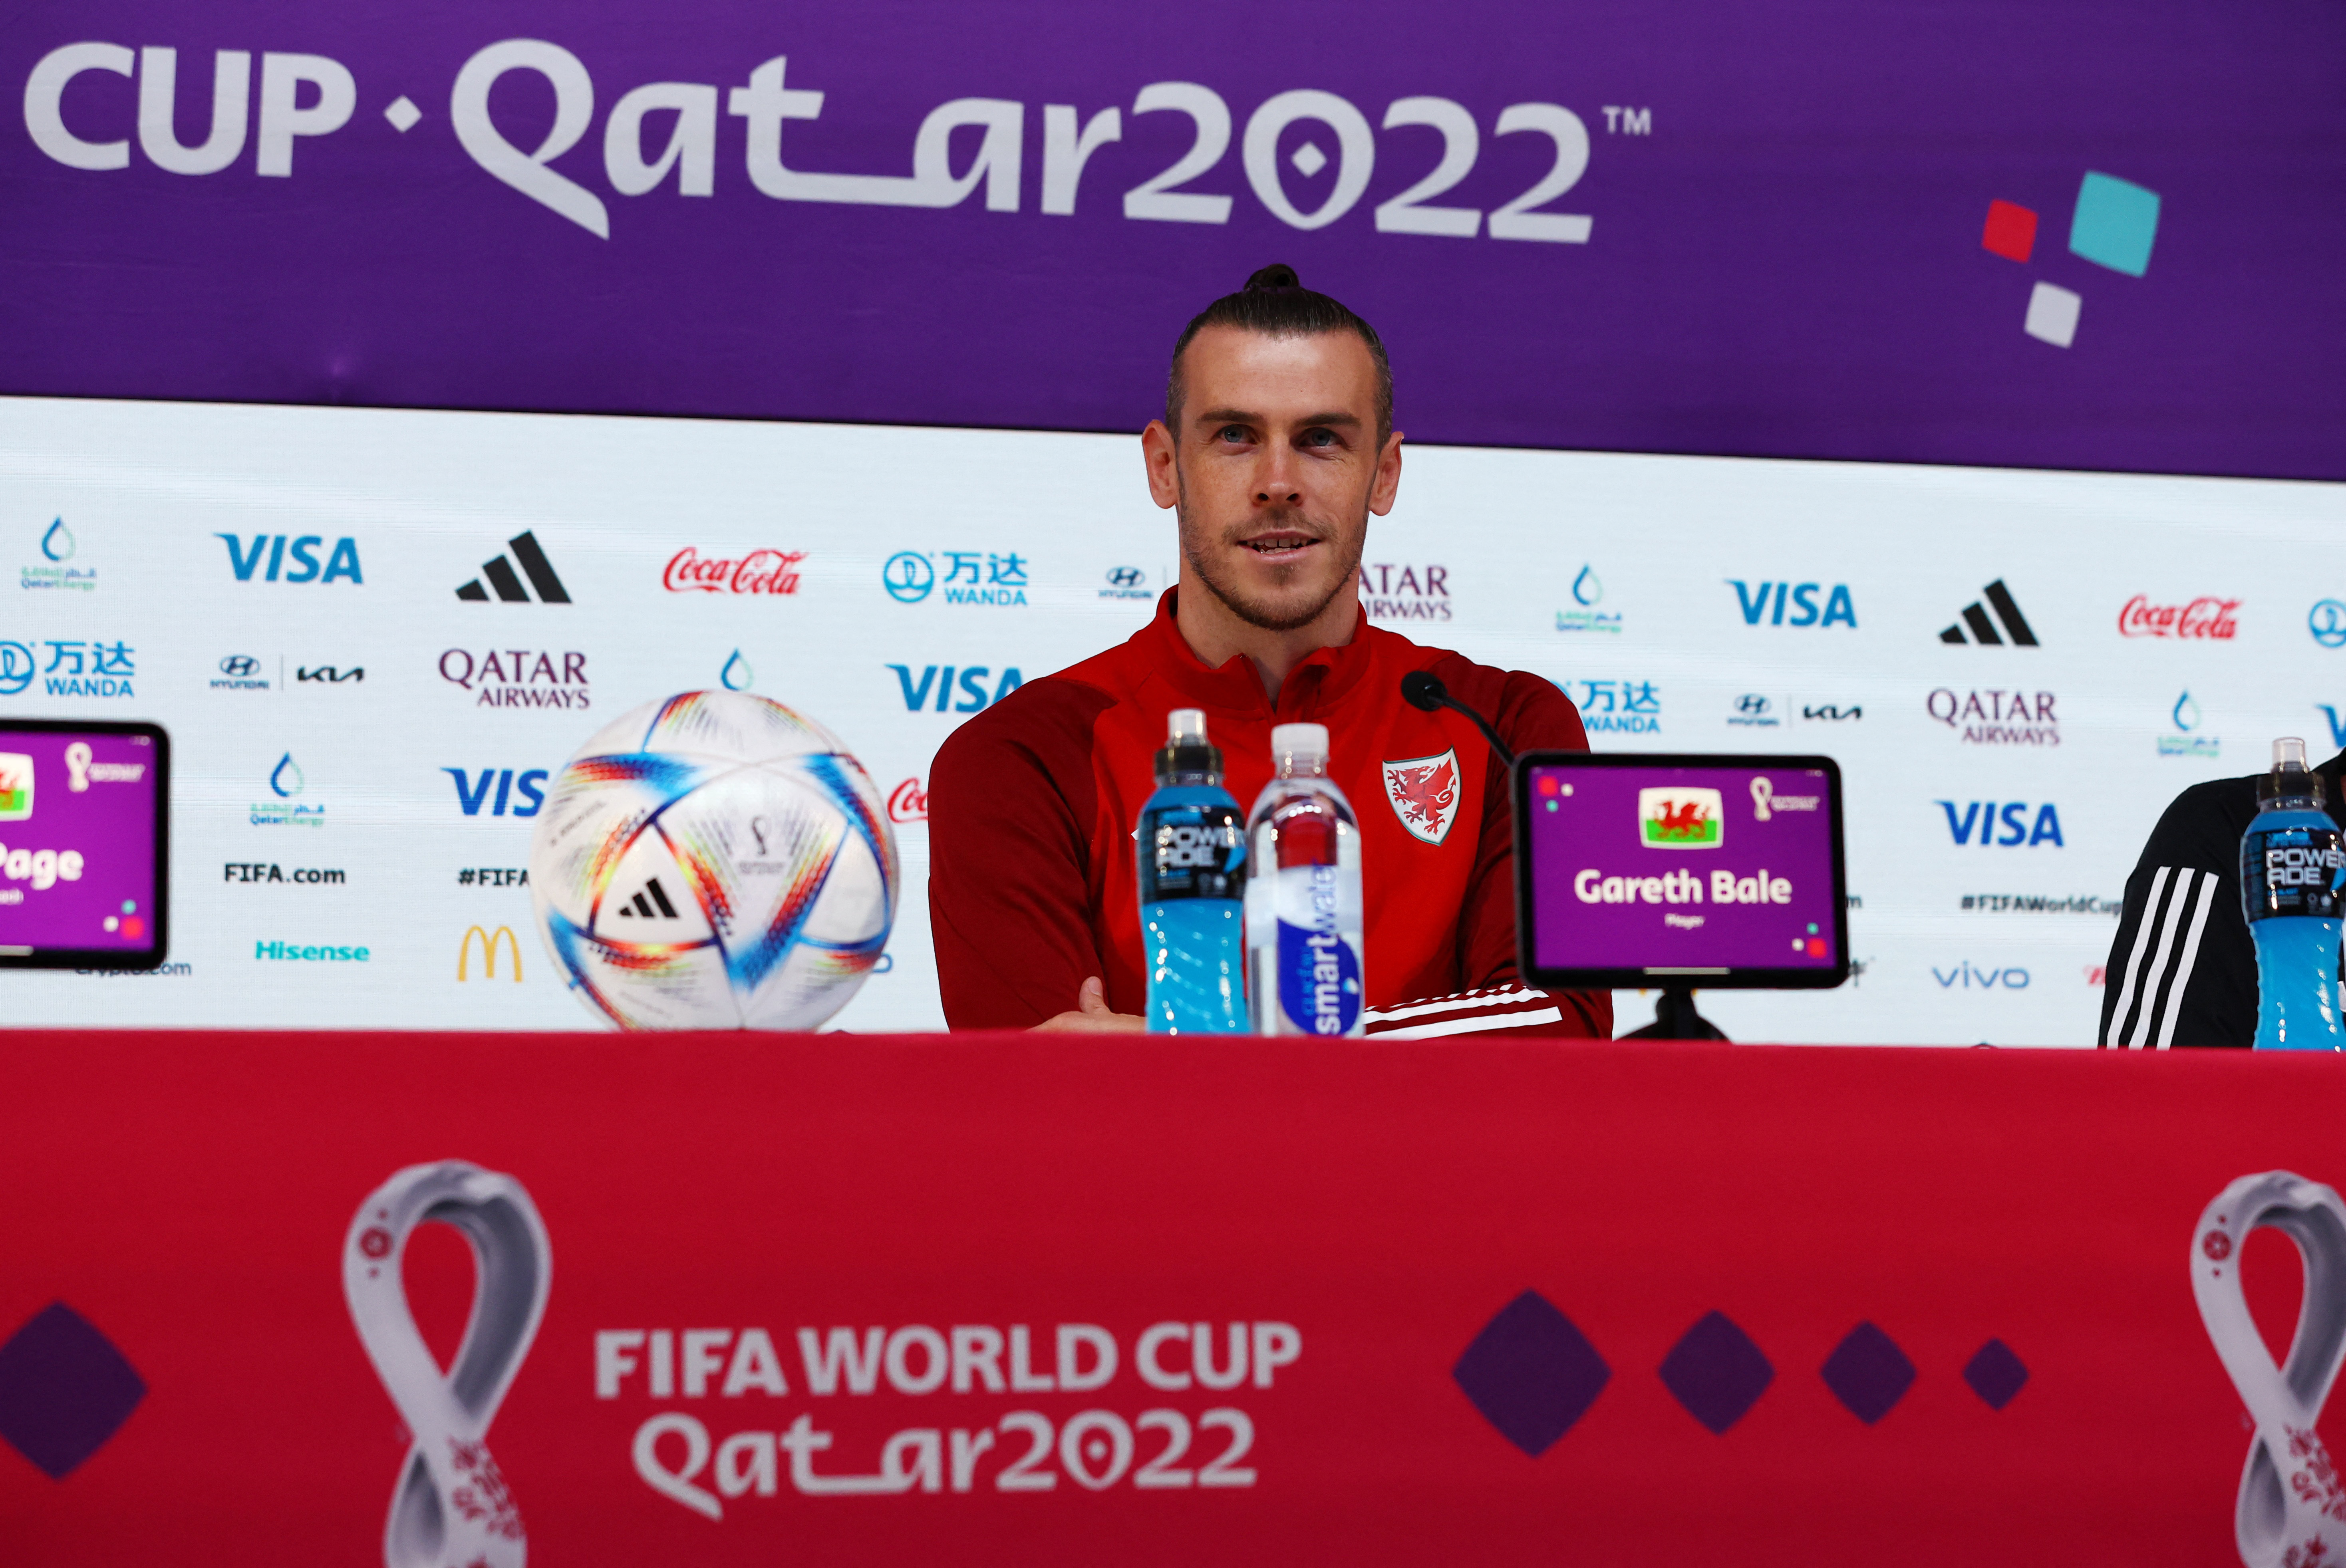 World Cup 2022: Gareth Bale goes with Wales to suffer at Qatar